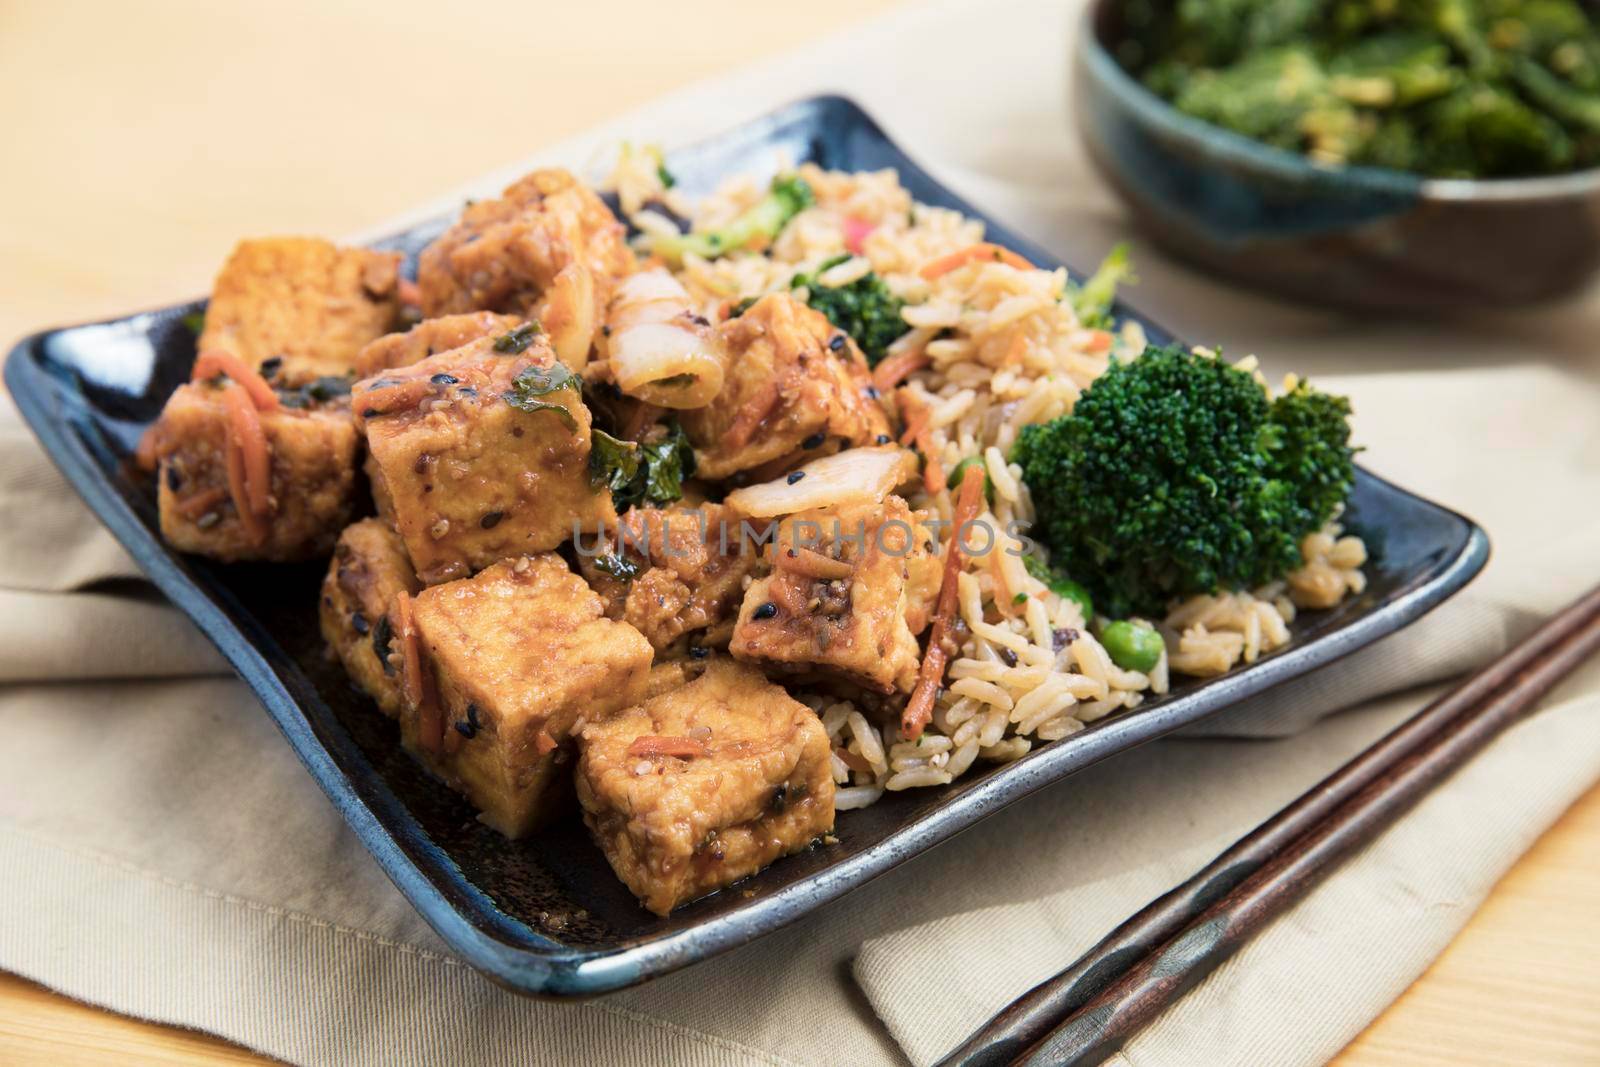 Fried tofu with rice and vegetable stir fry vegan asian meal.